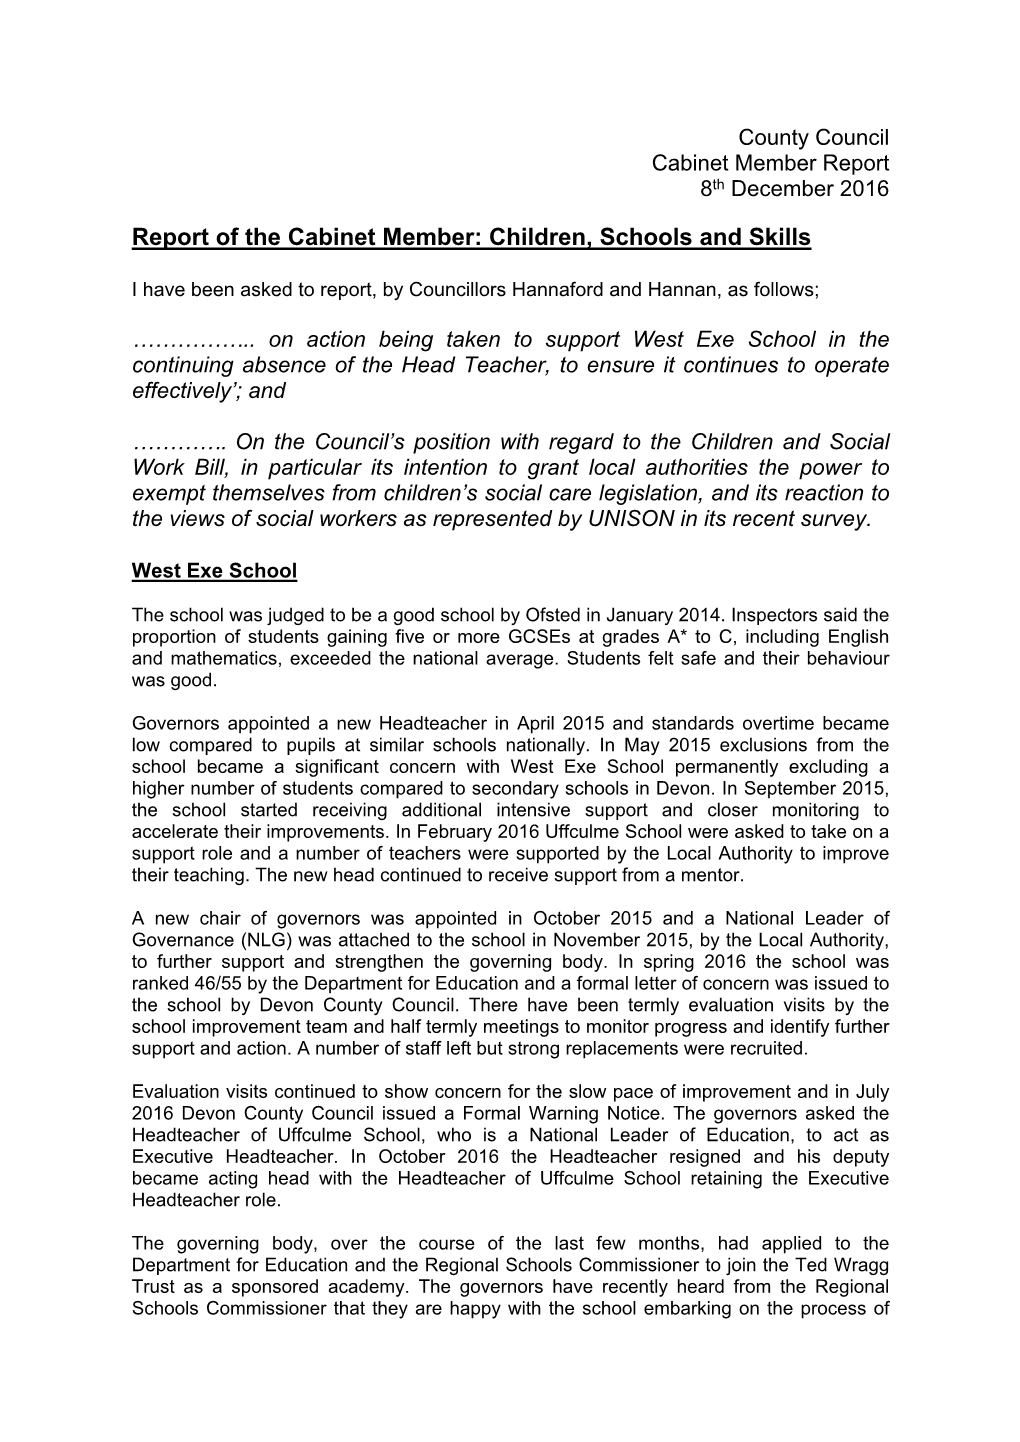 Report of the Cabinet Member: Children, Schools and Skills